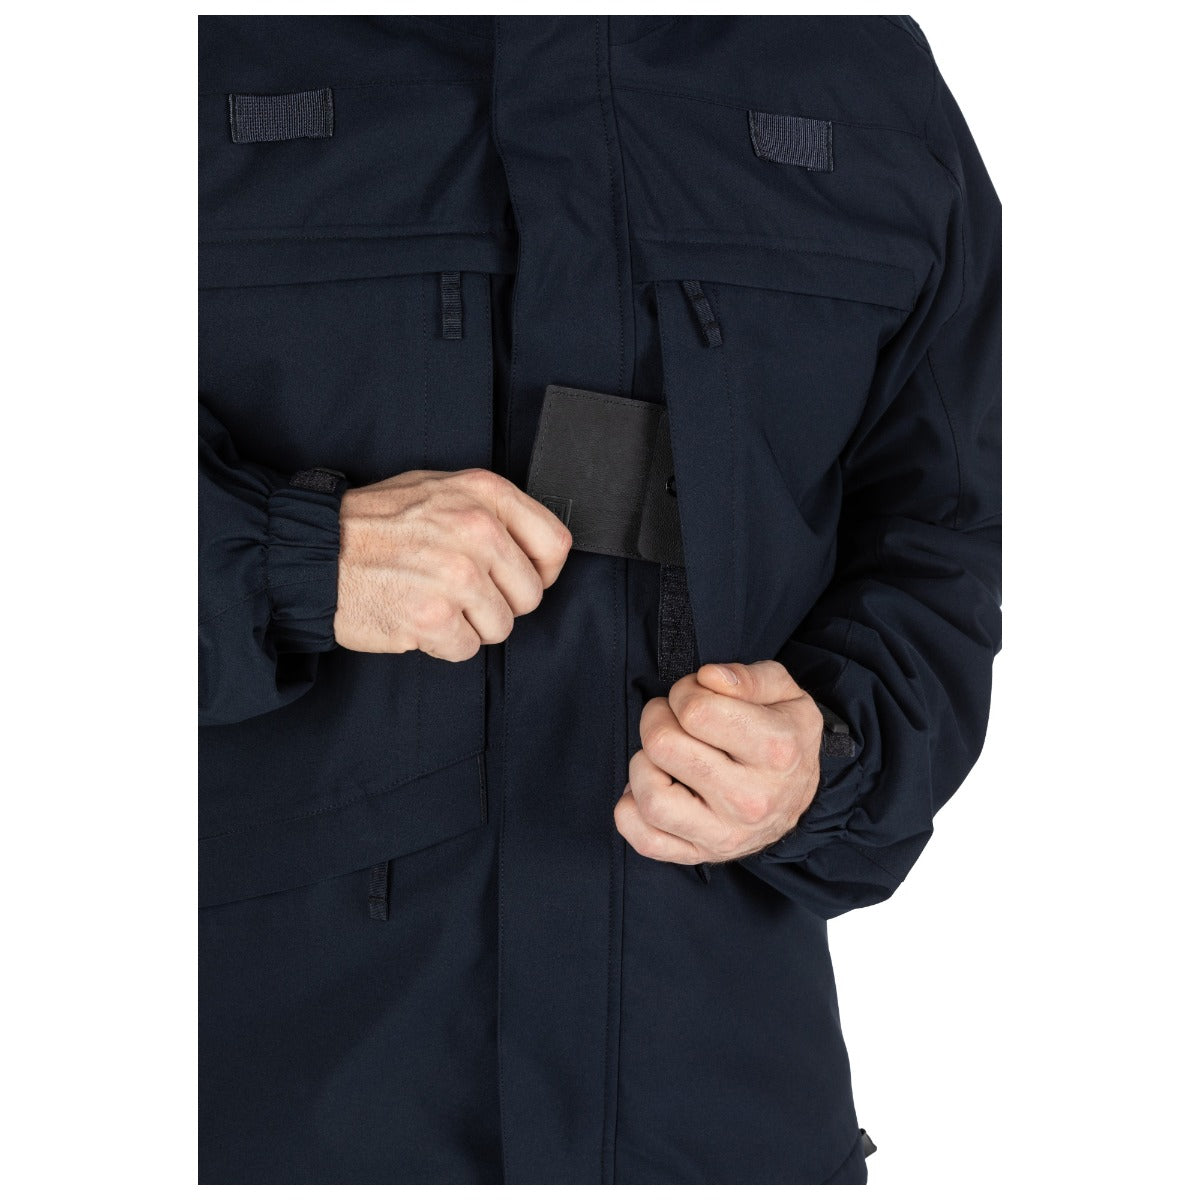 5.11 Tactical 3-In-1 Parka 2.0